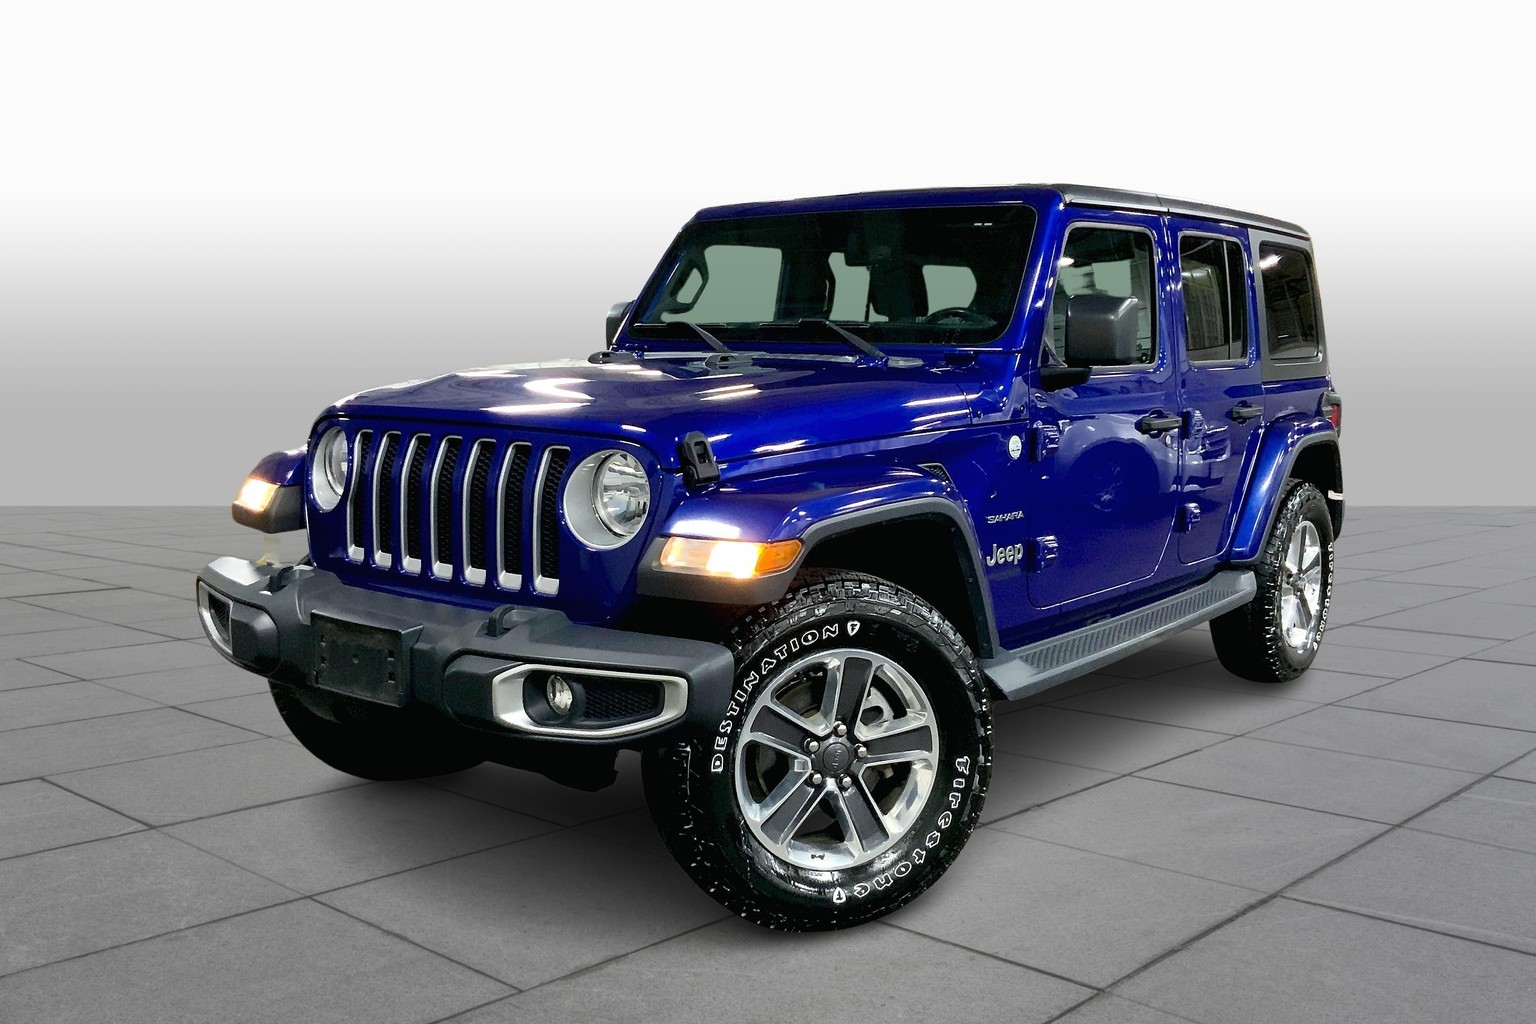 Pre-Owned 2018 Jeep Wrangler Unlimited Sahara 4x4 Sport Utility in Danvers  #JW246499 | Ira Toyota of Danvers